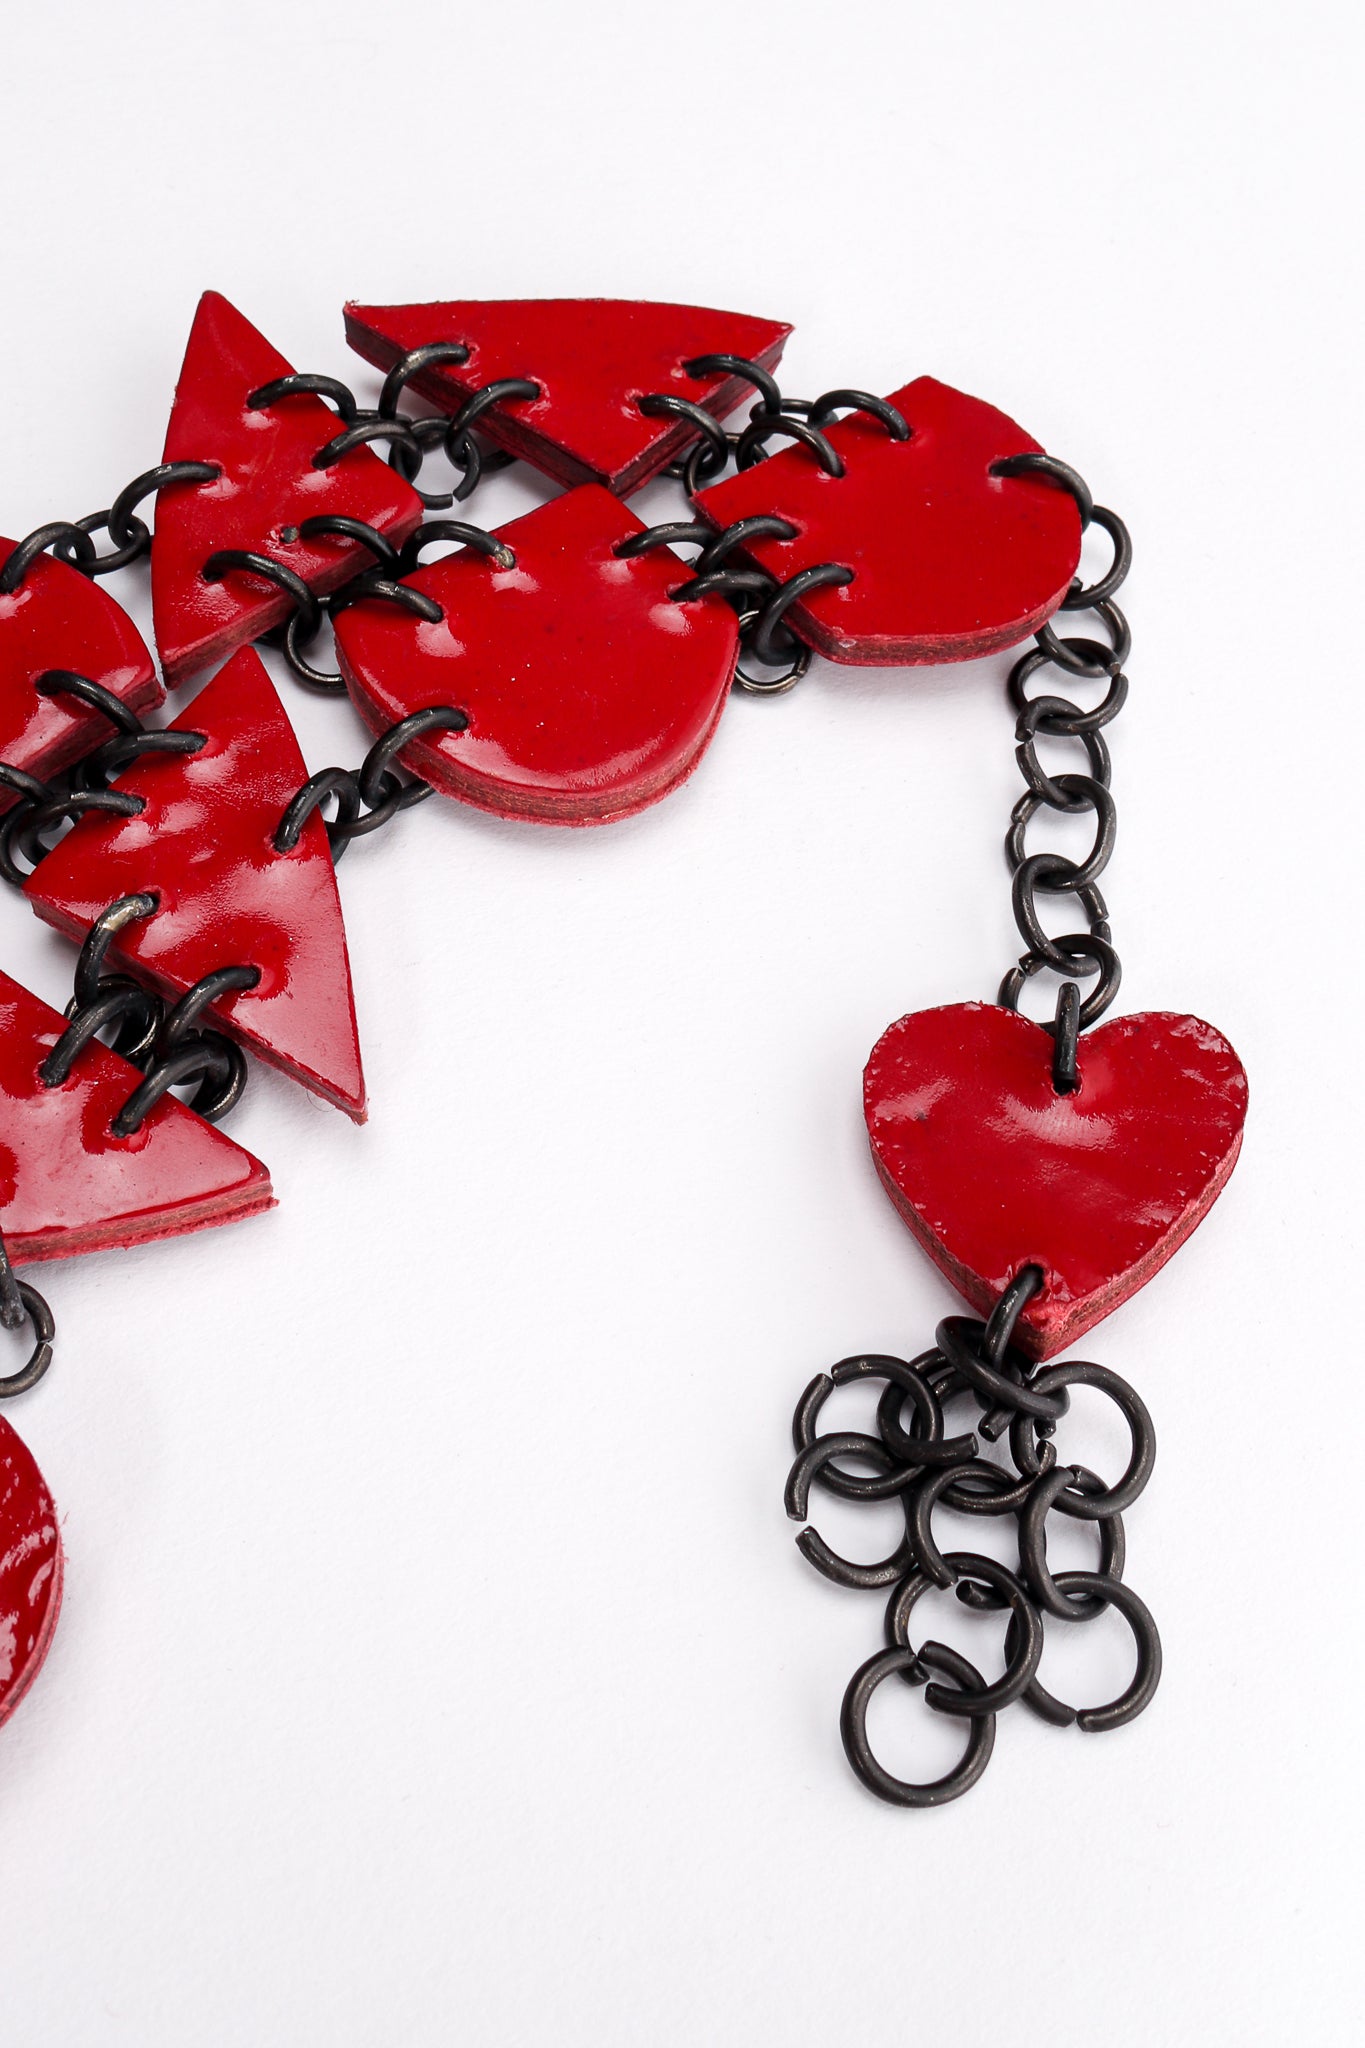 Vintage Moschino Lacquered Broken Heart Chain Belt fob charm at Recess Los Angeles